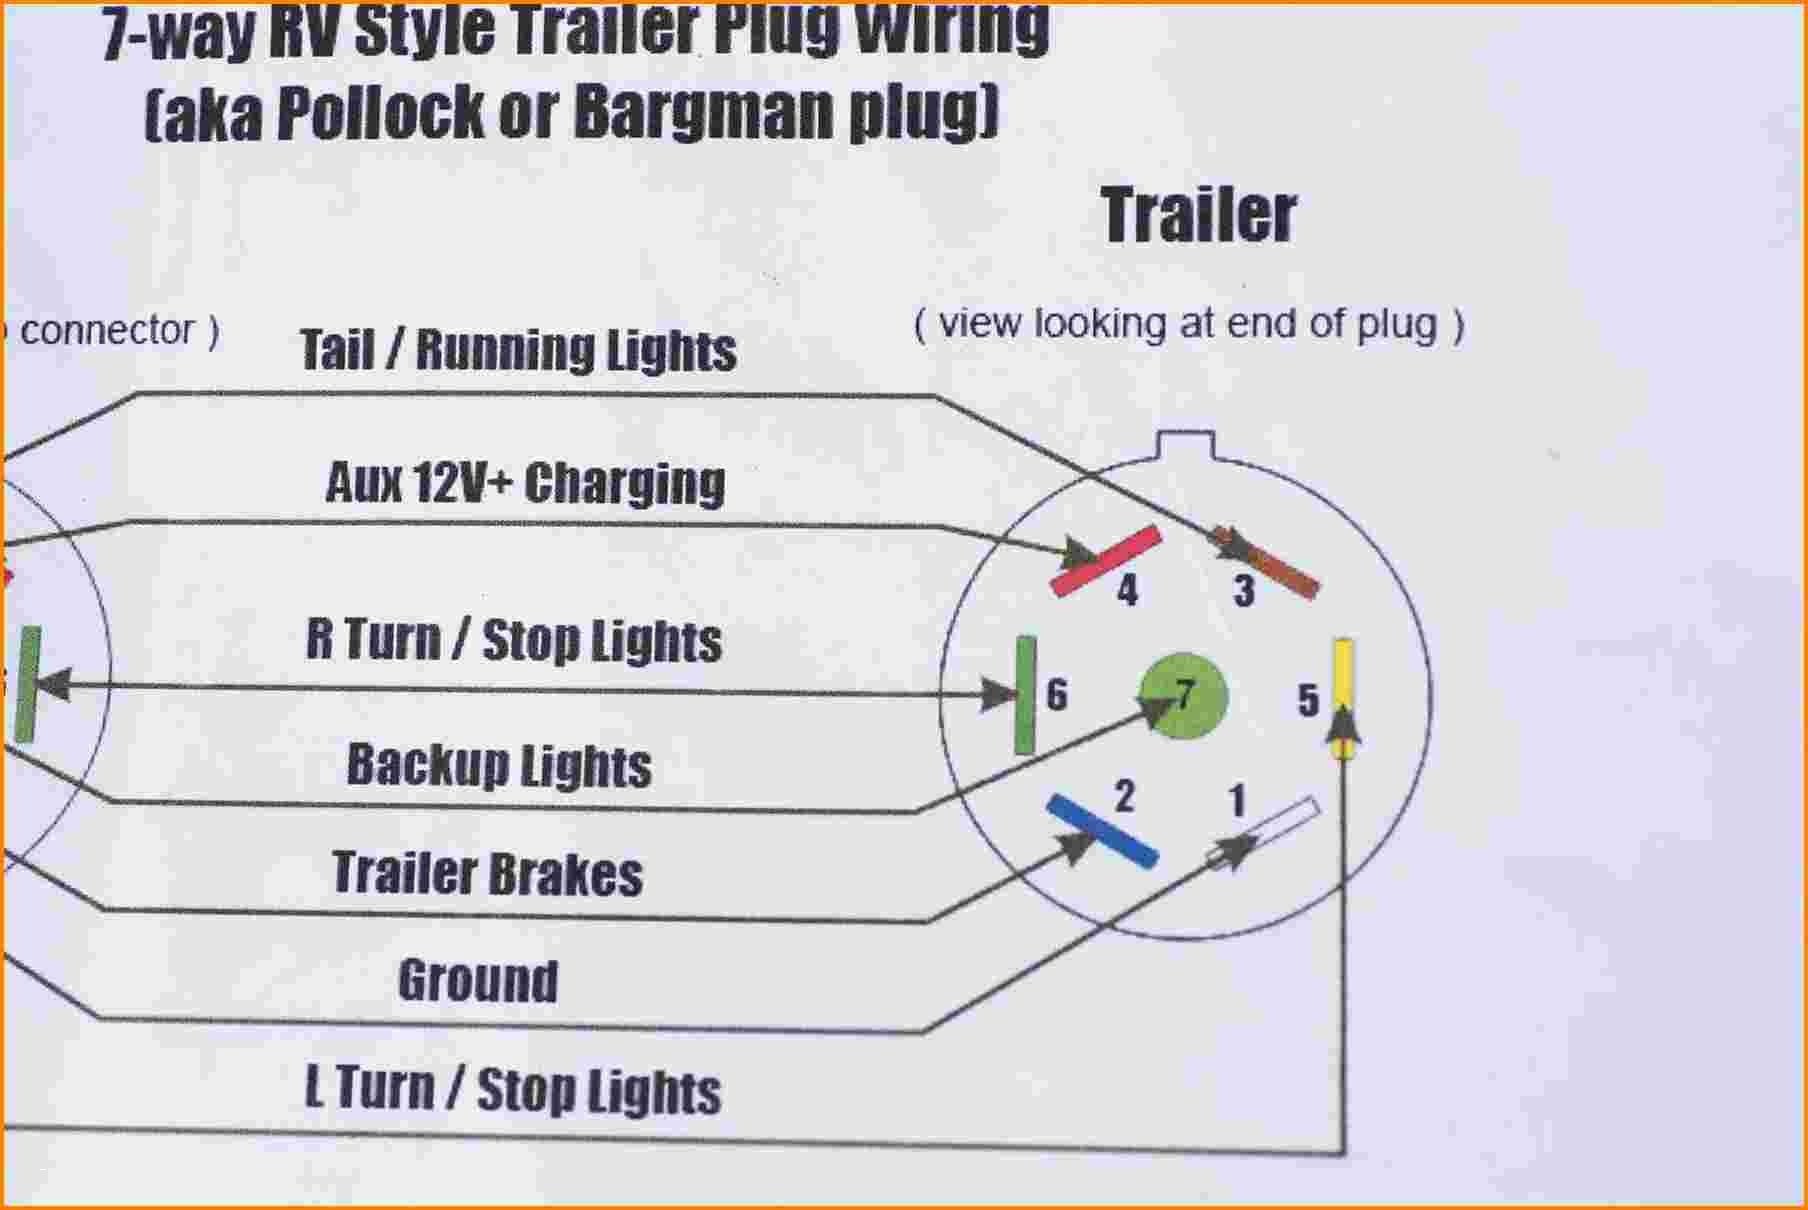 Wiring Diagram for Rv Plug New 7 Wire Trailer Plug Diagram Unique Awesome Semi Trailer Wiring